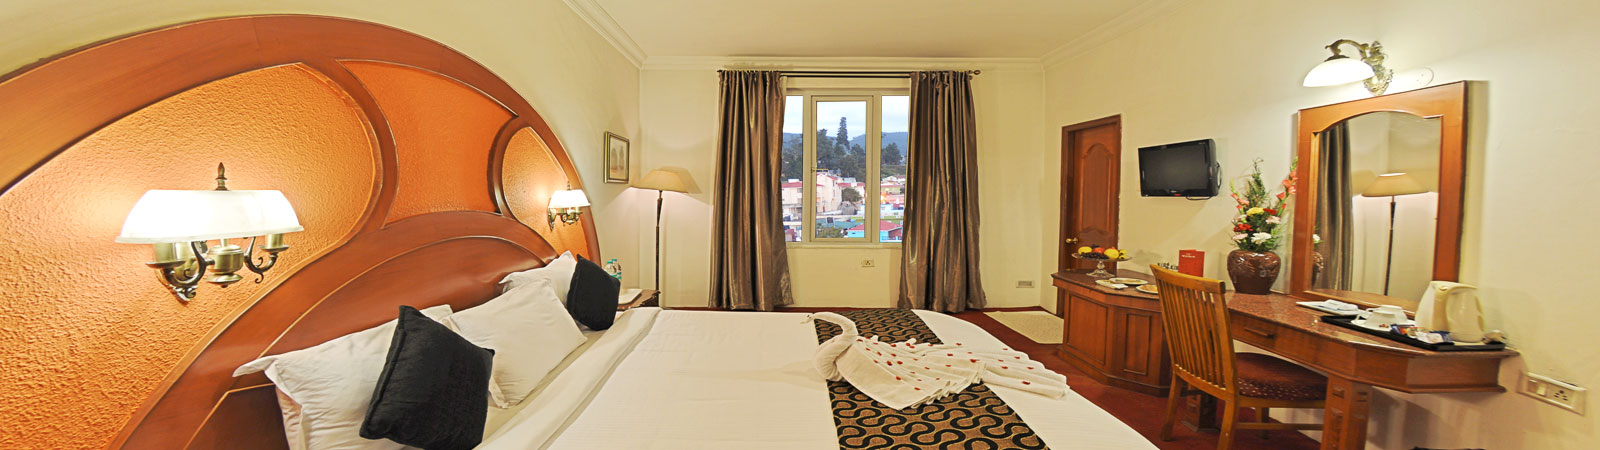 Hotels in Ooty for family